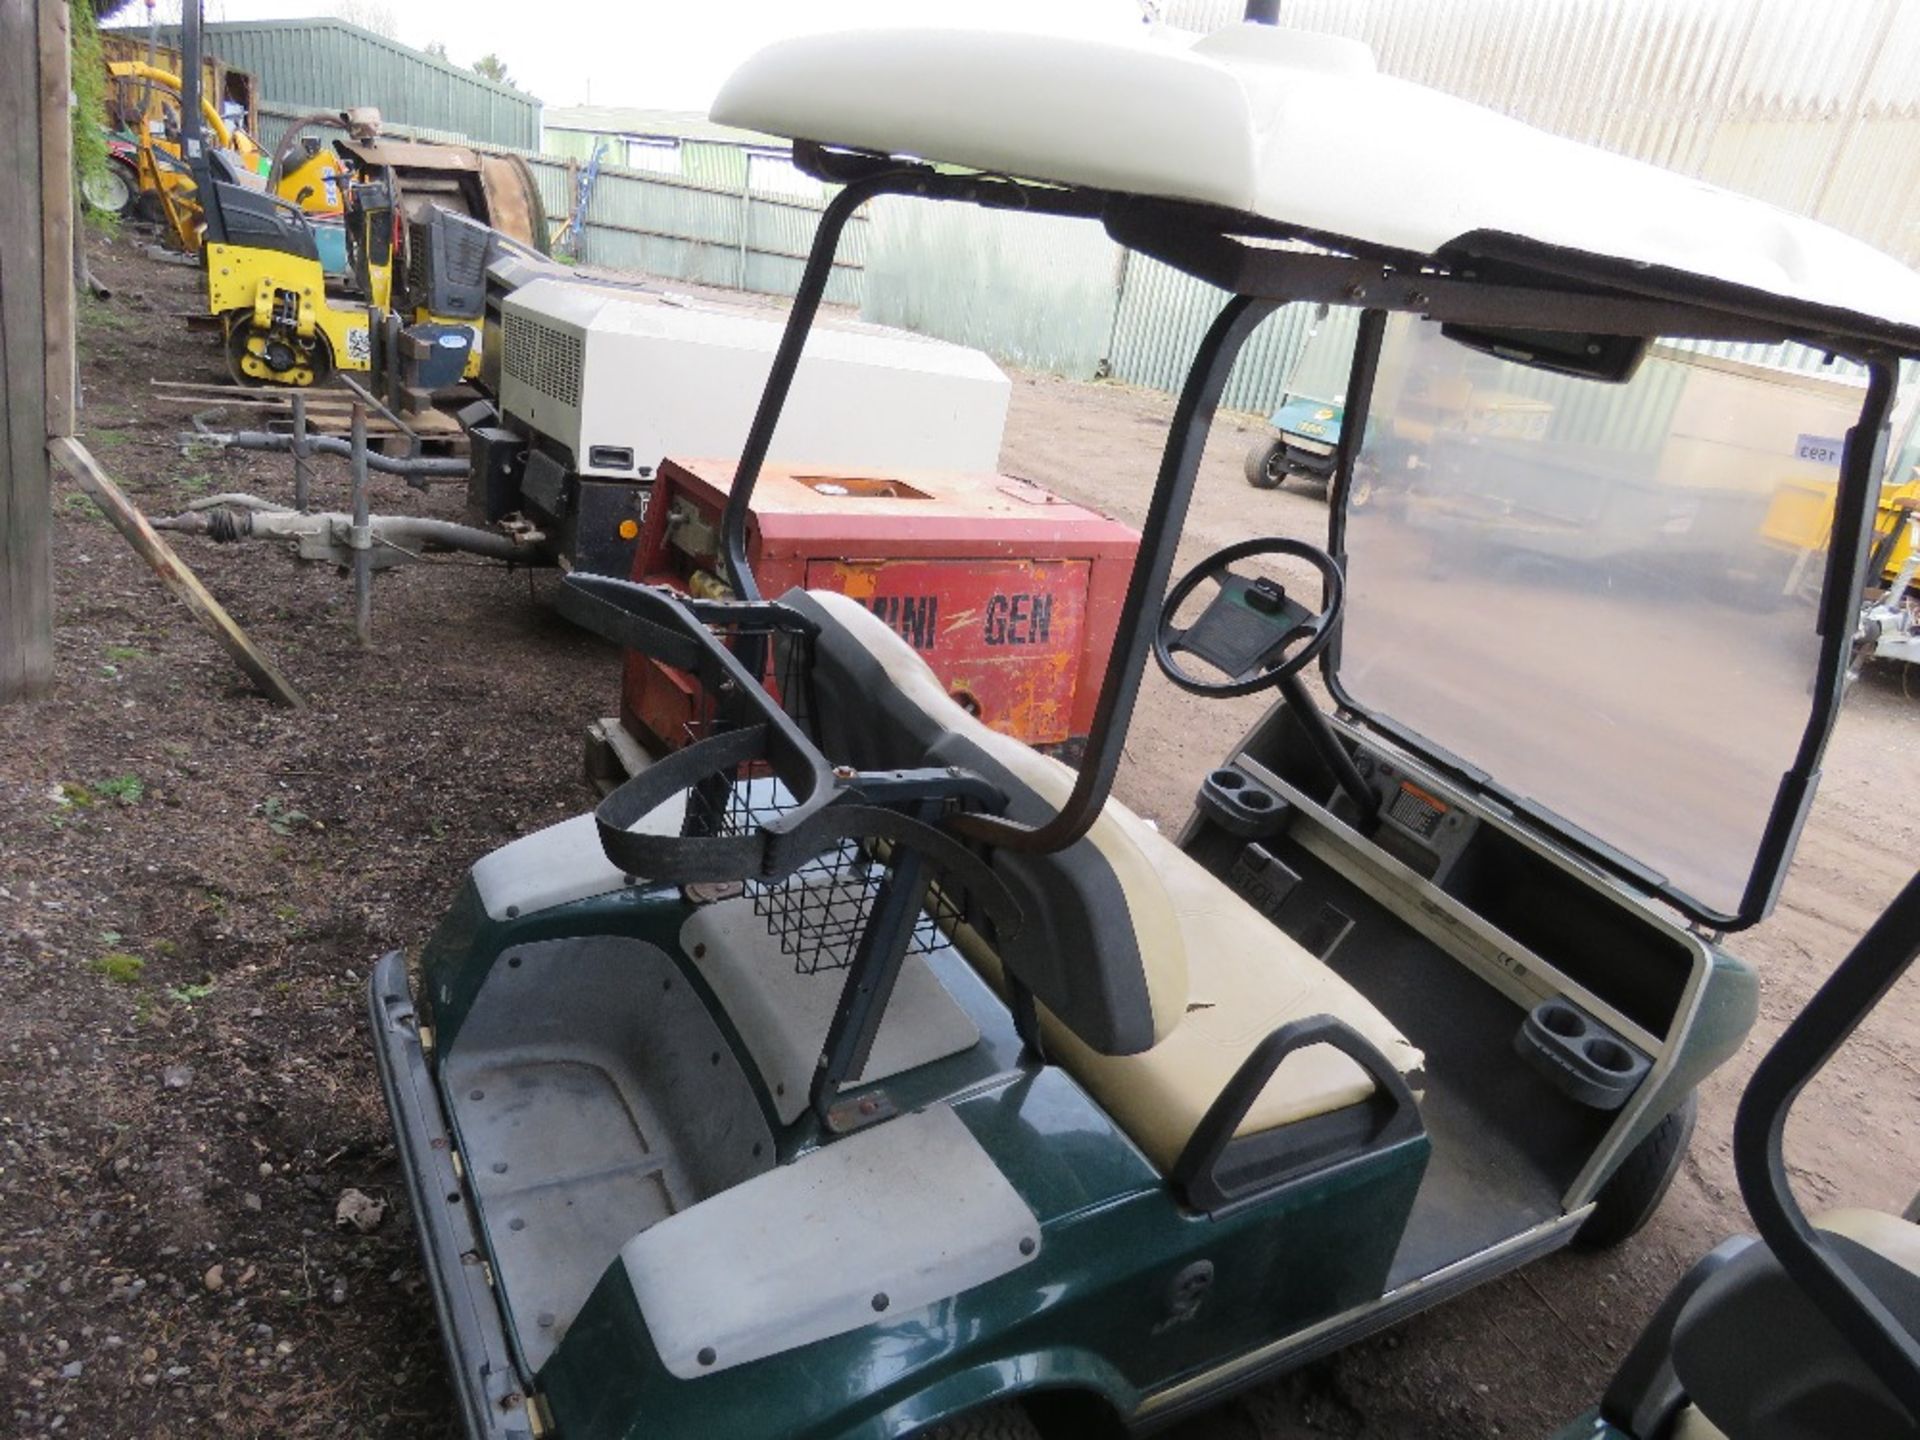 CLUBCAR PETROL ENGINED GOLF CART. BEEN STORED FOR SOME TIME, UNTESTED. - Image 5 of 8